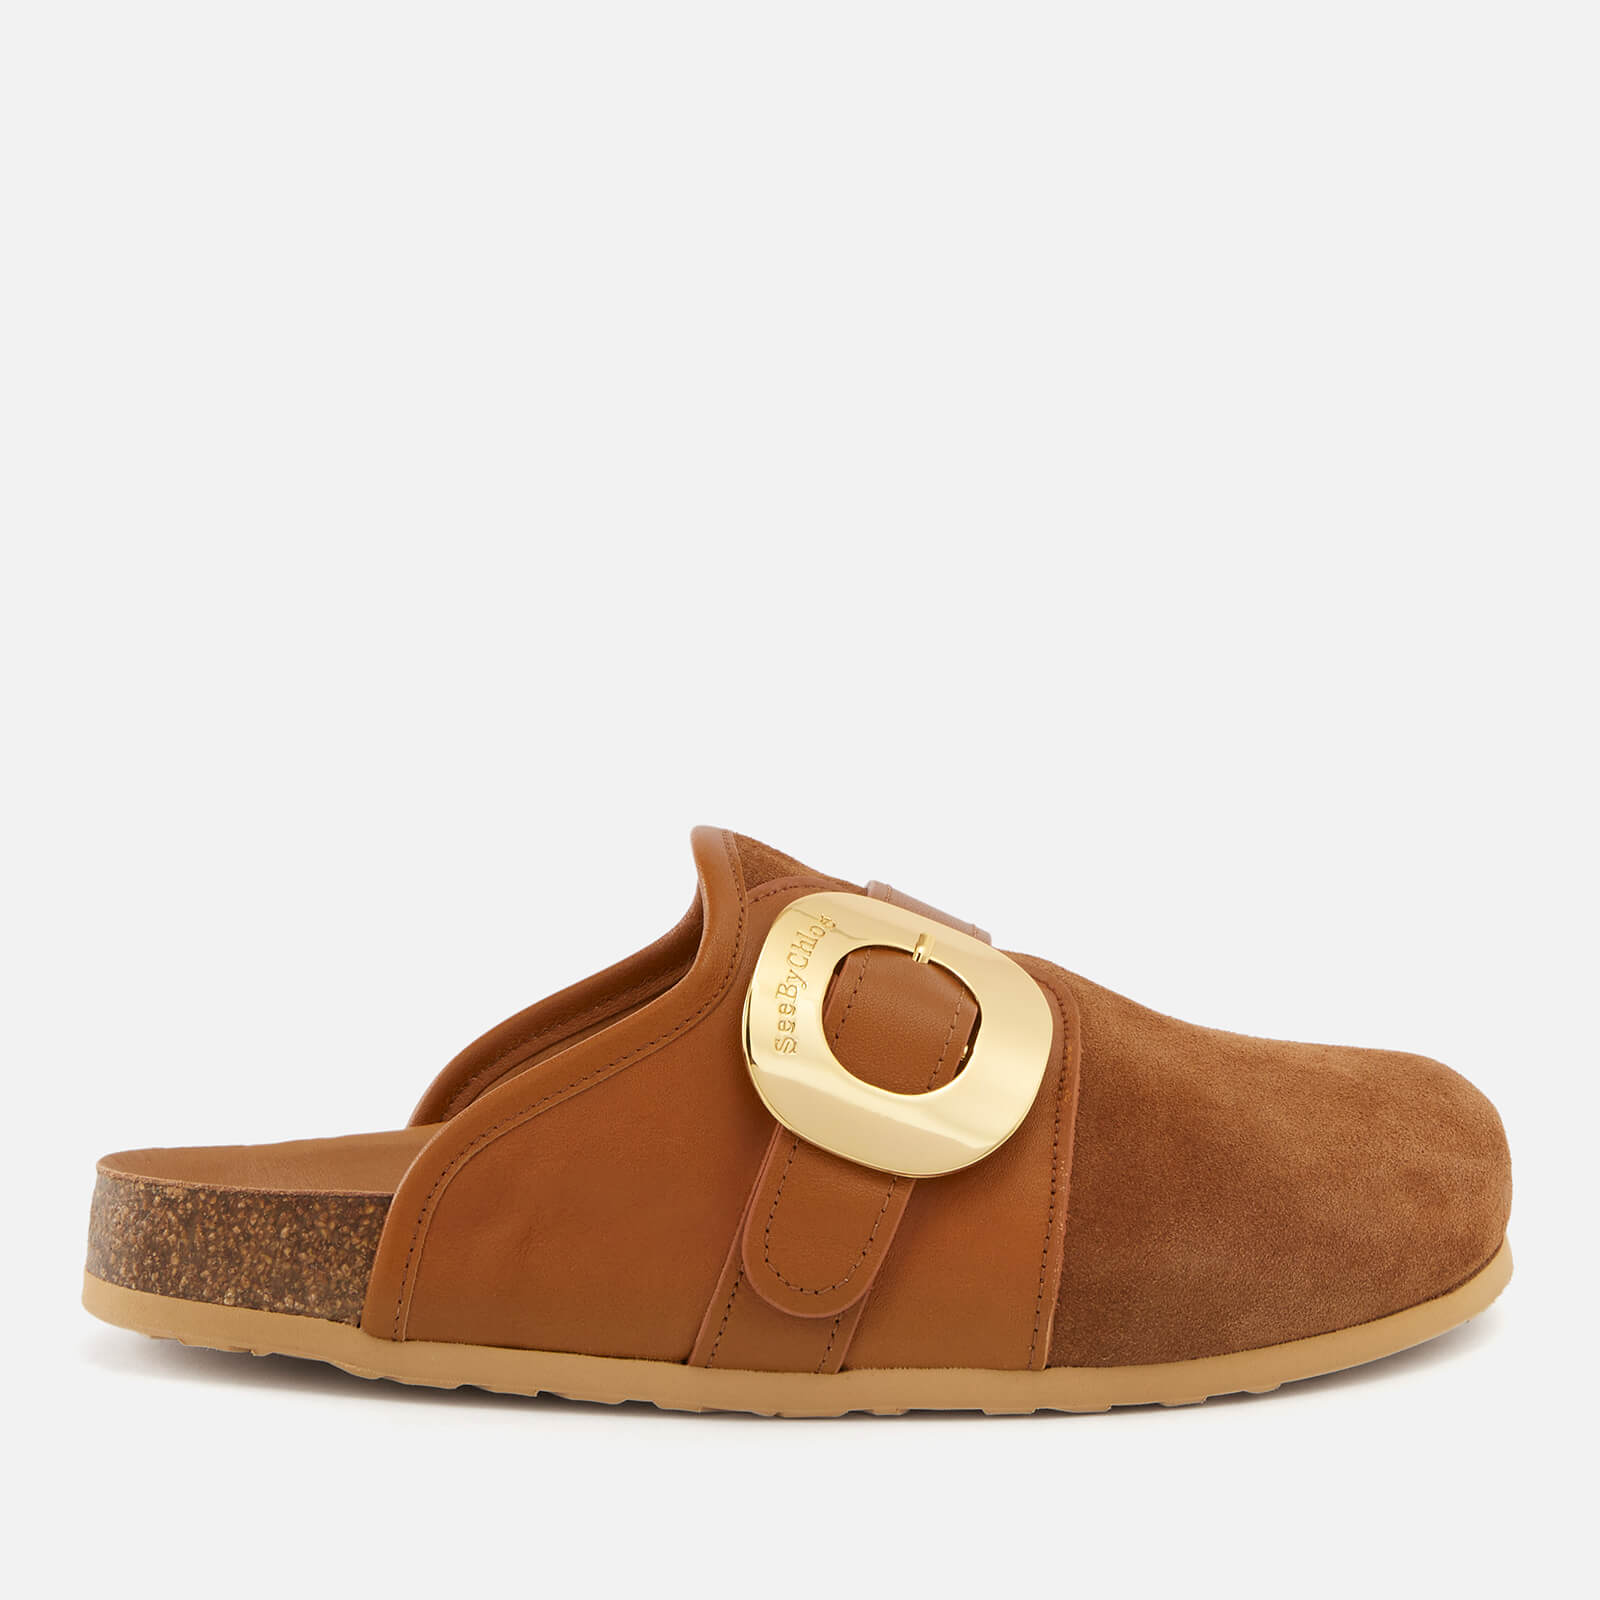 See by Chloe Women's Chany Fussbelt Suede Mules